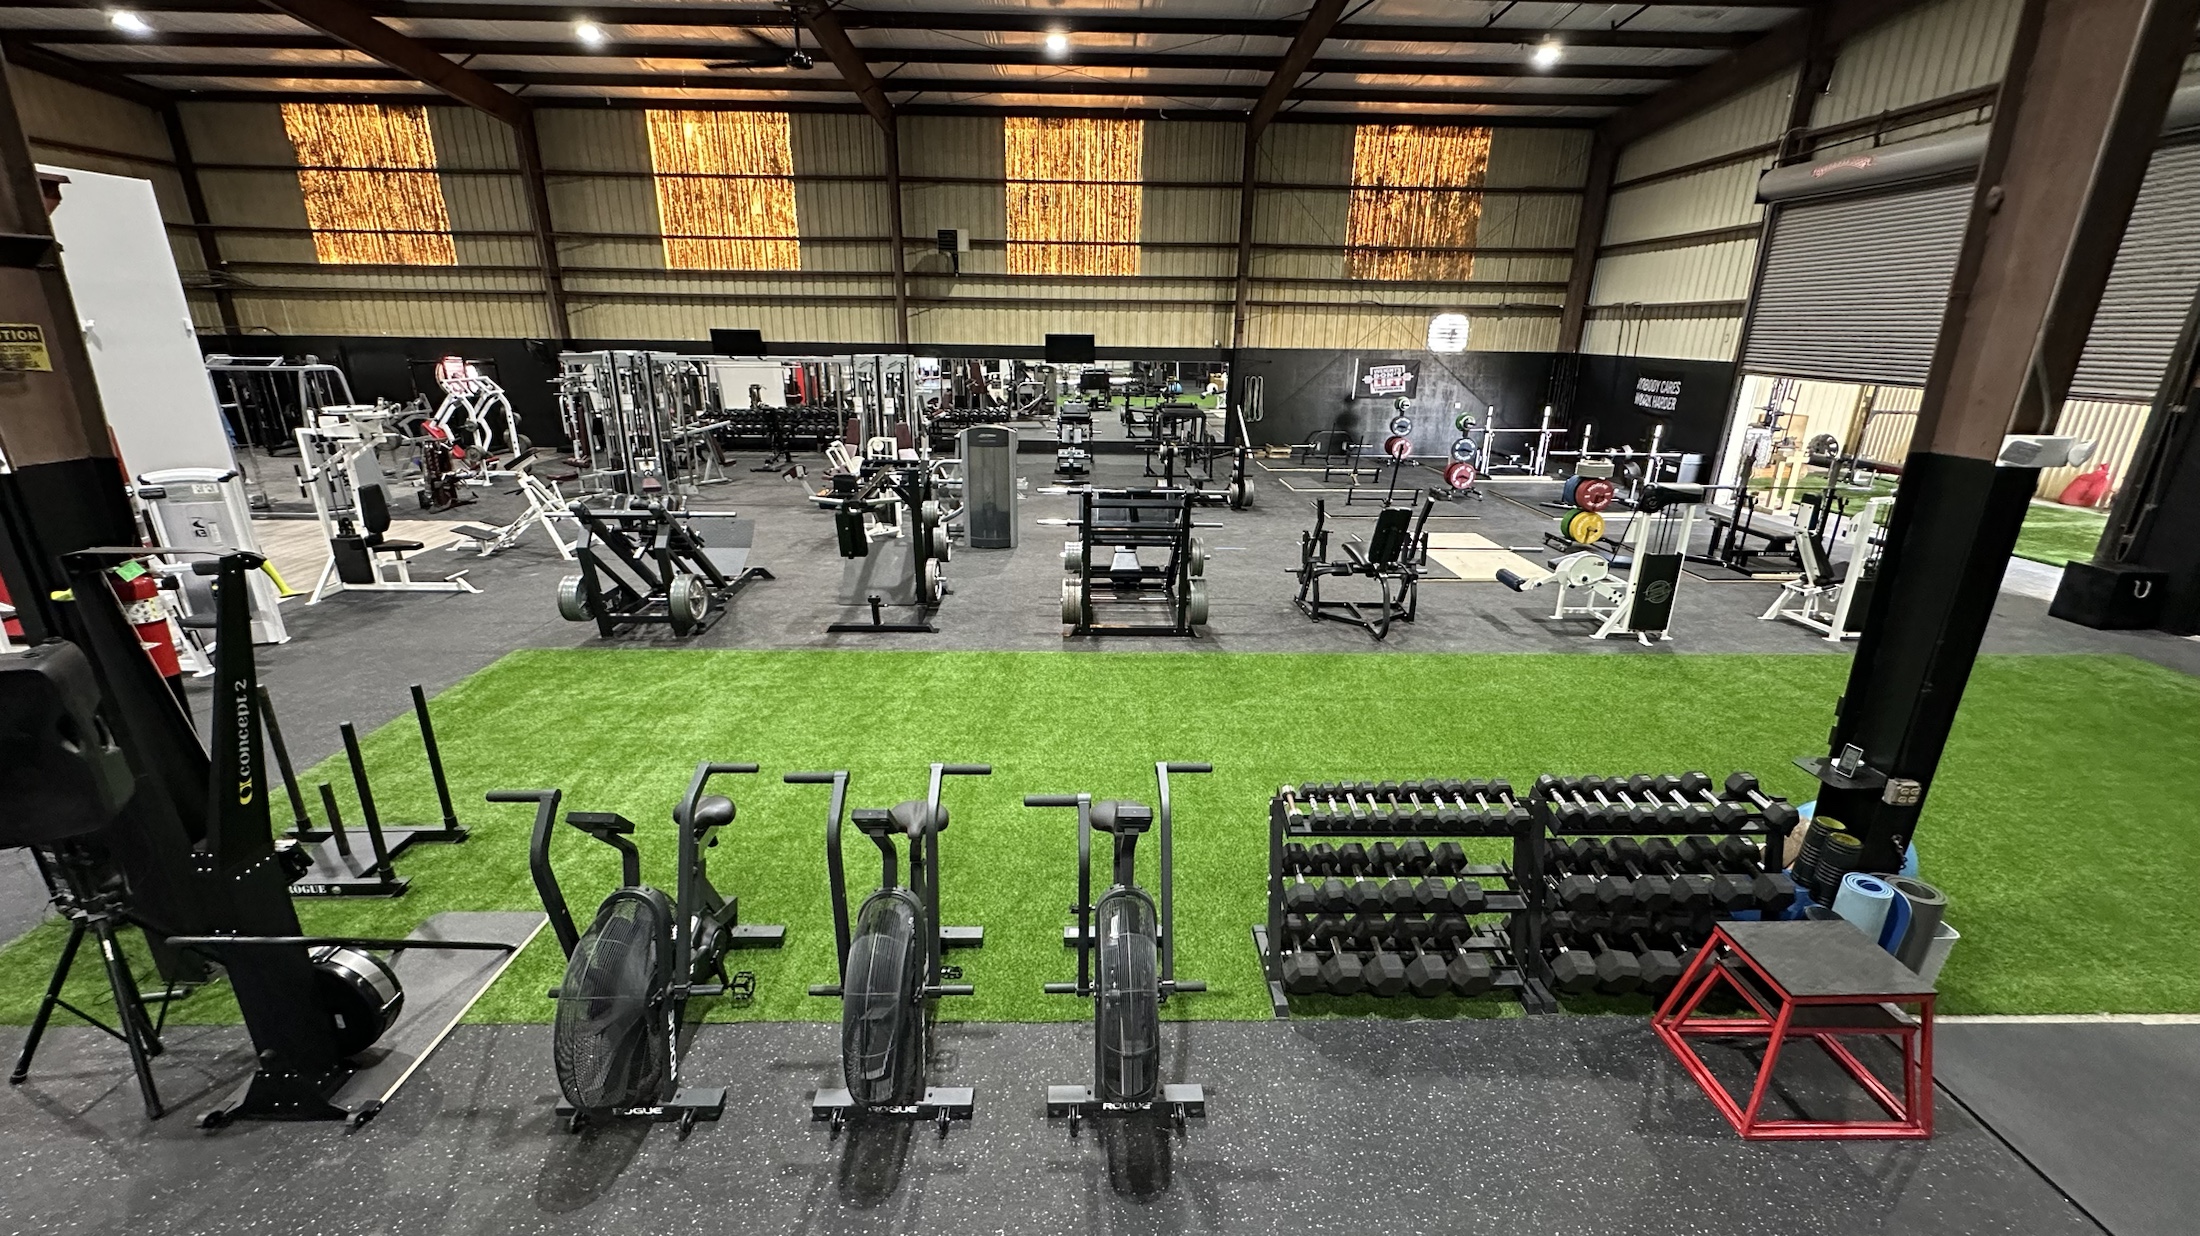 Iron House Gym To Officially Open In New, Larger Location – Developing ...